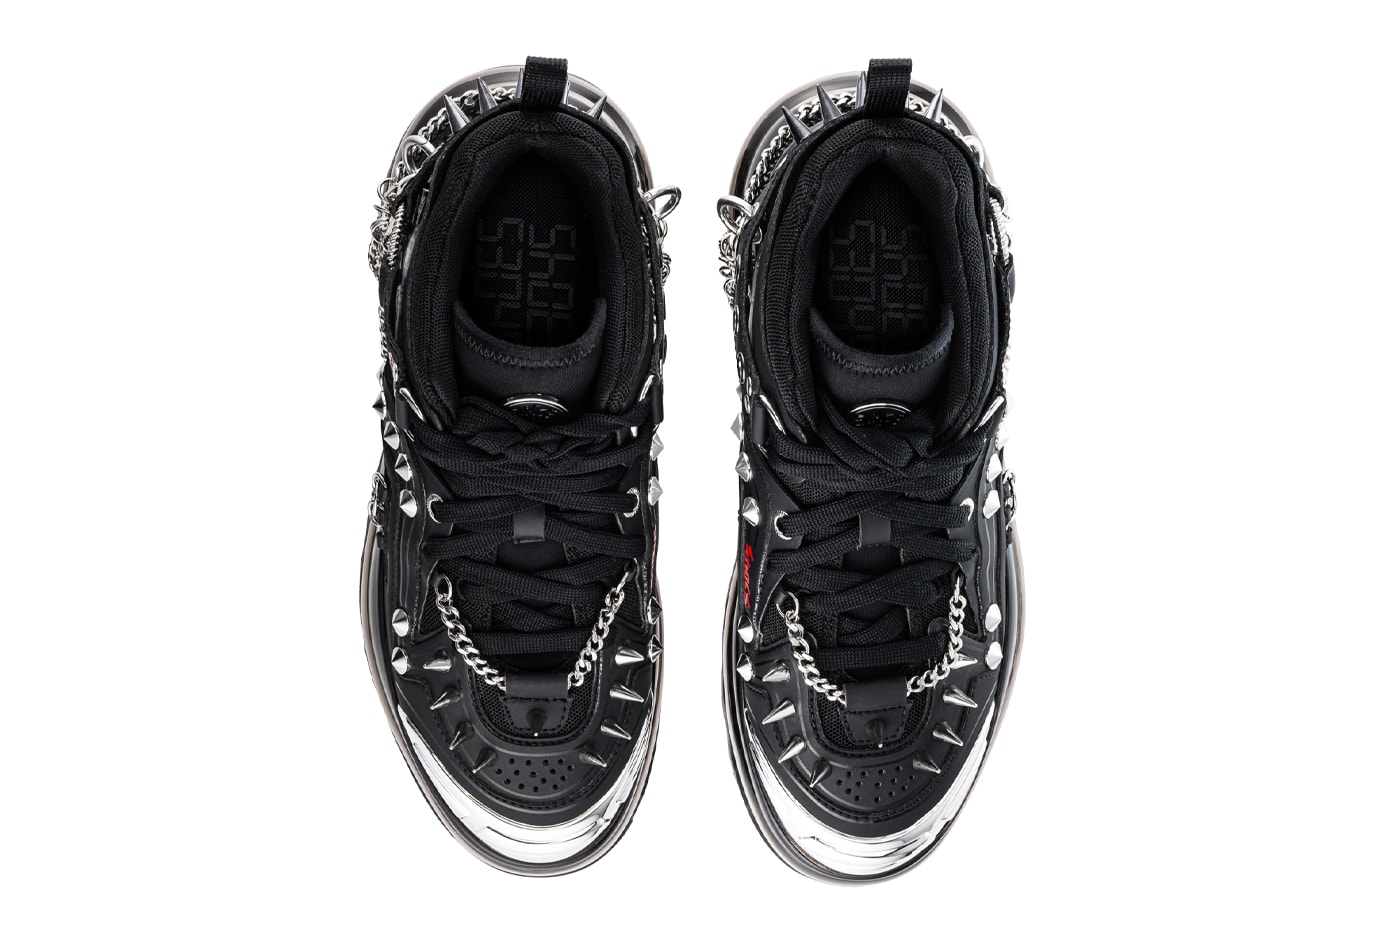 SHOES 50345 からパンク感漂うオールブラックを基調とした新作 Bump'Air High Top 2型が登場  SHOES 53045 Bump'Air High Top Black Gothic Release Info sneaker shoes footwear designer where to cop drop details price COVID-19 Student Resource Food Fund DAVID TOURNIAIRE-BEAUCIEL bajowoo 99%iS